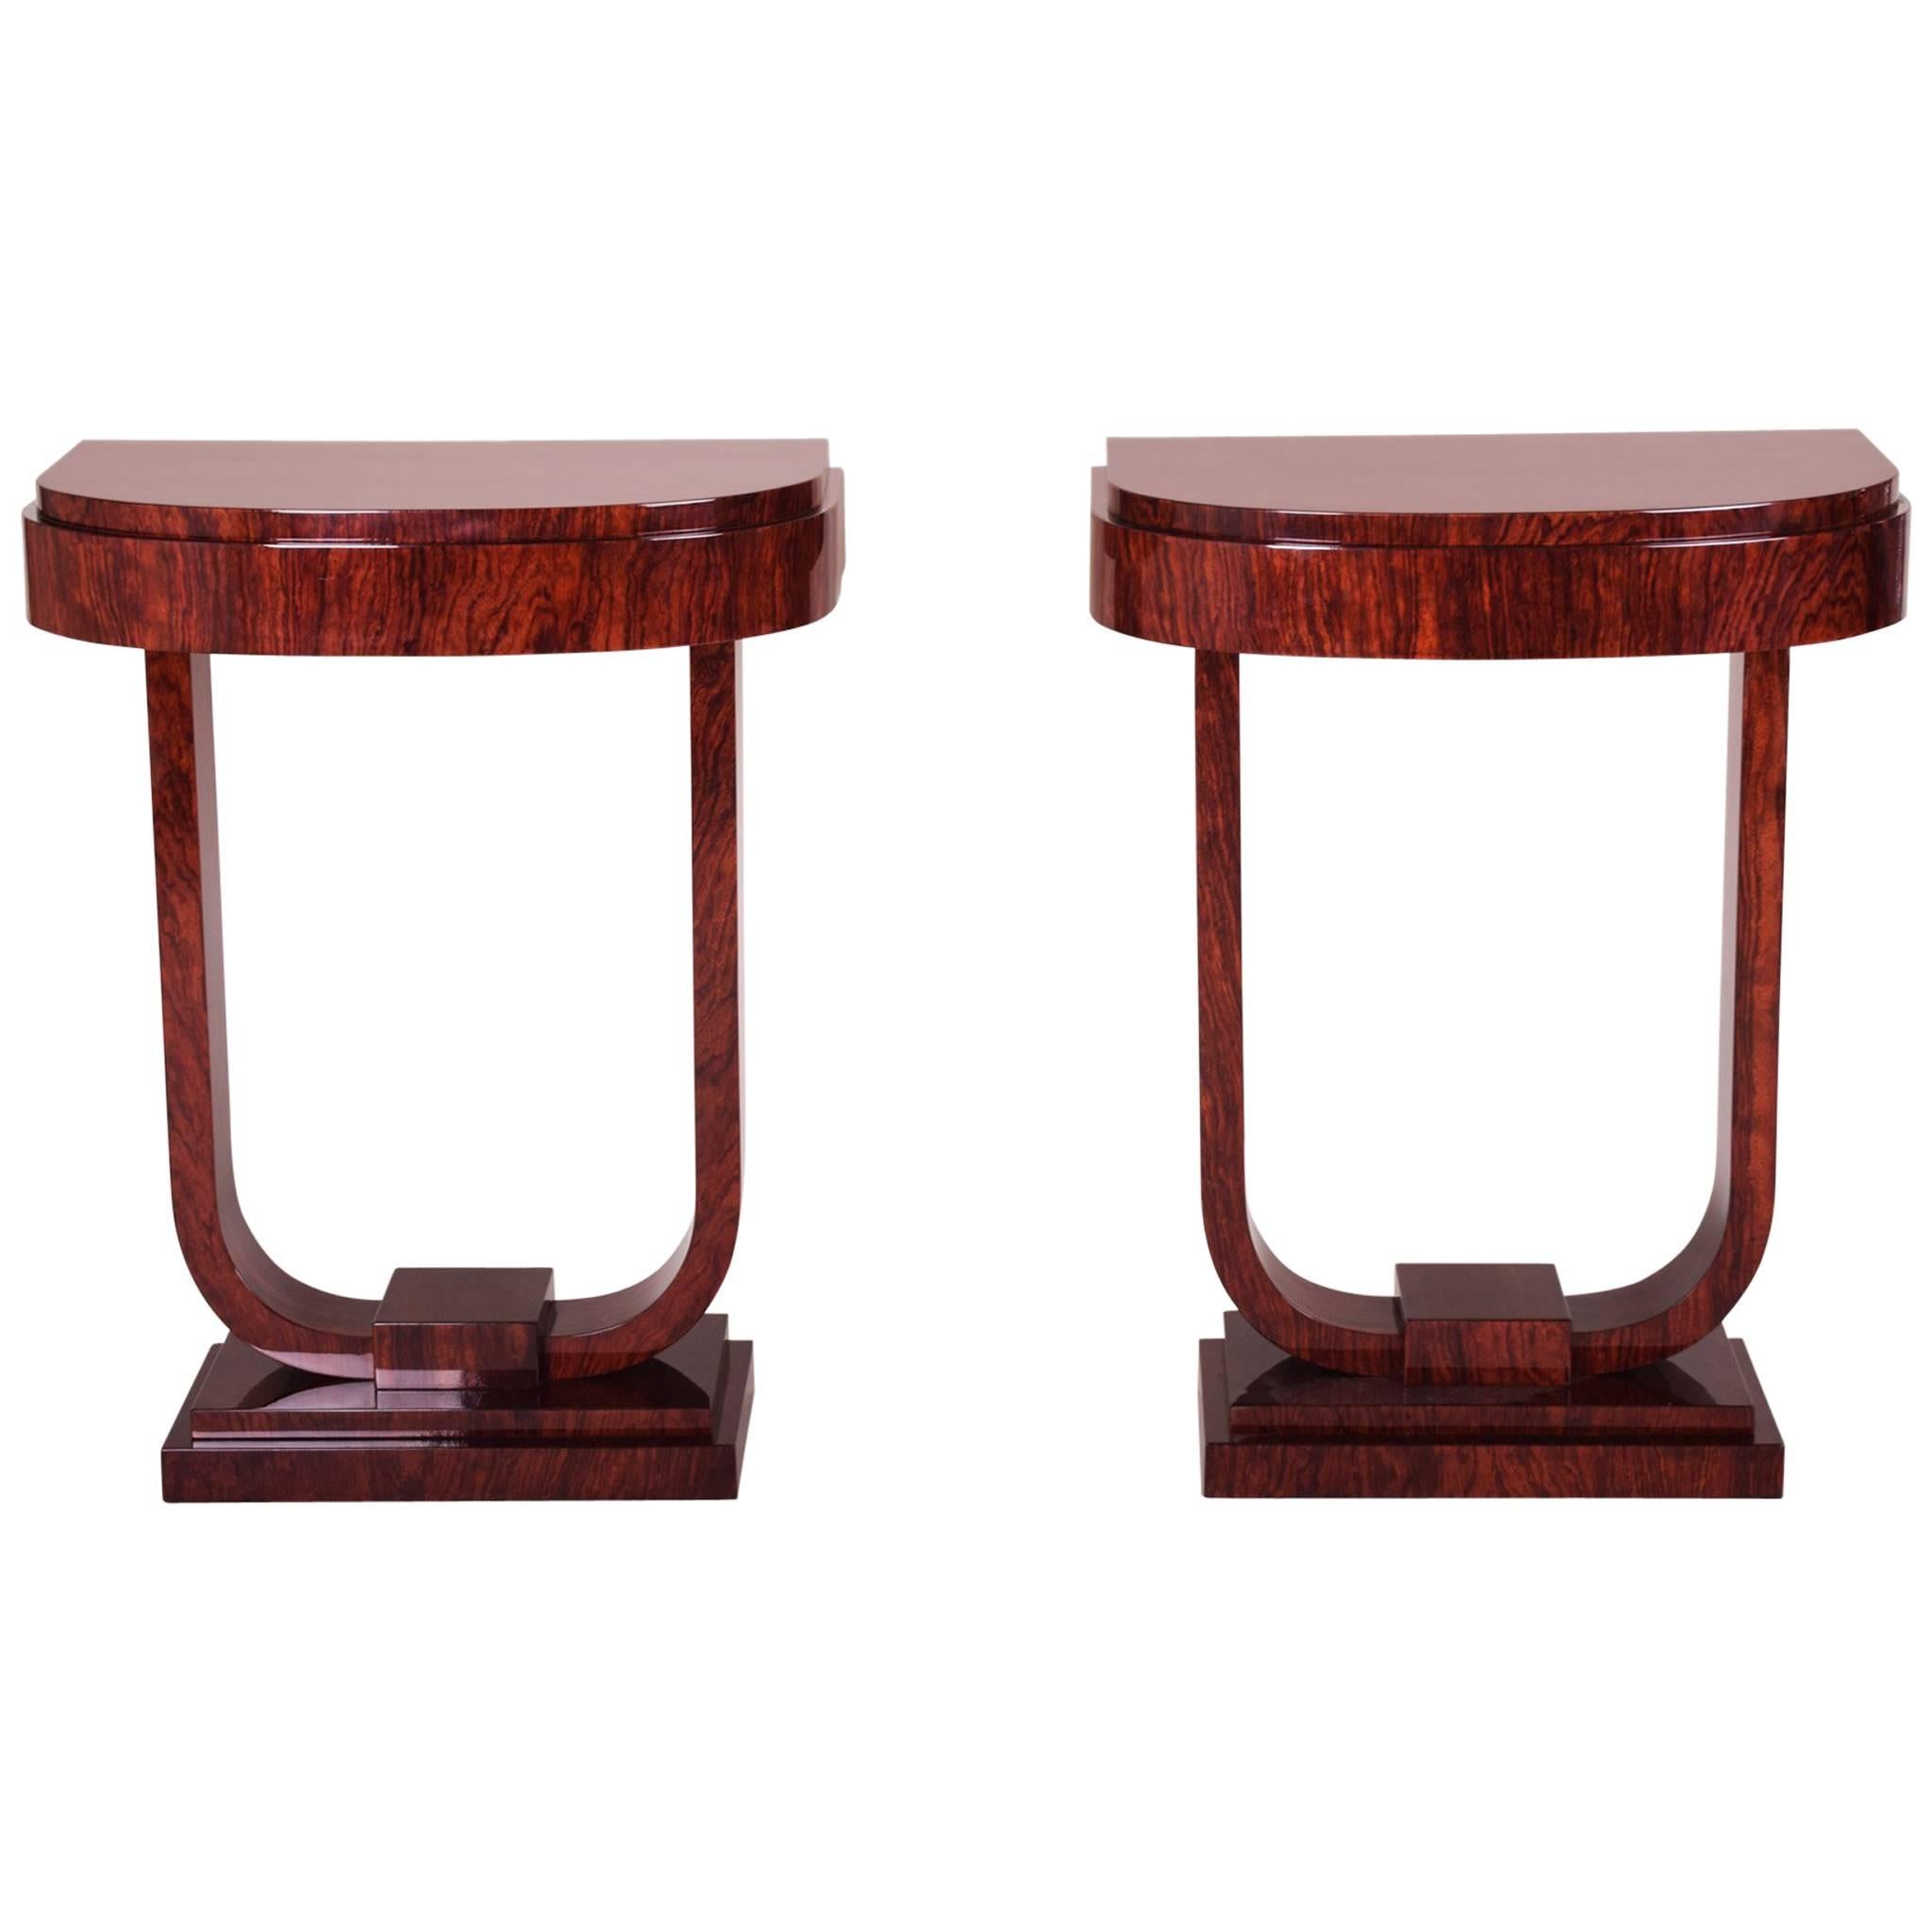 Pair of French Art Deco Console Tables, Material Palisander